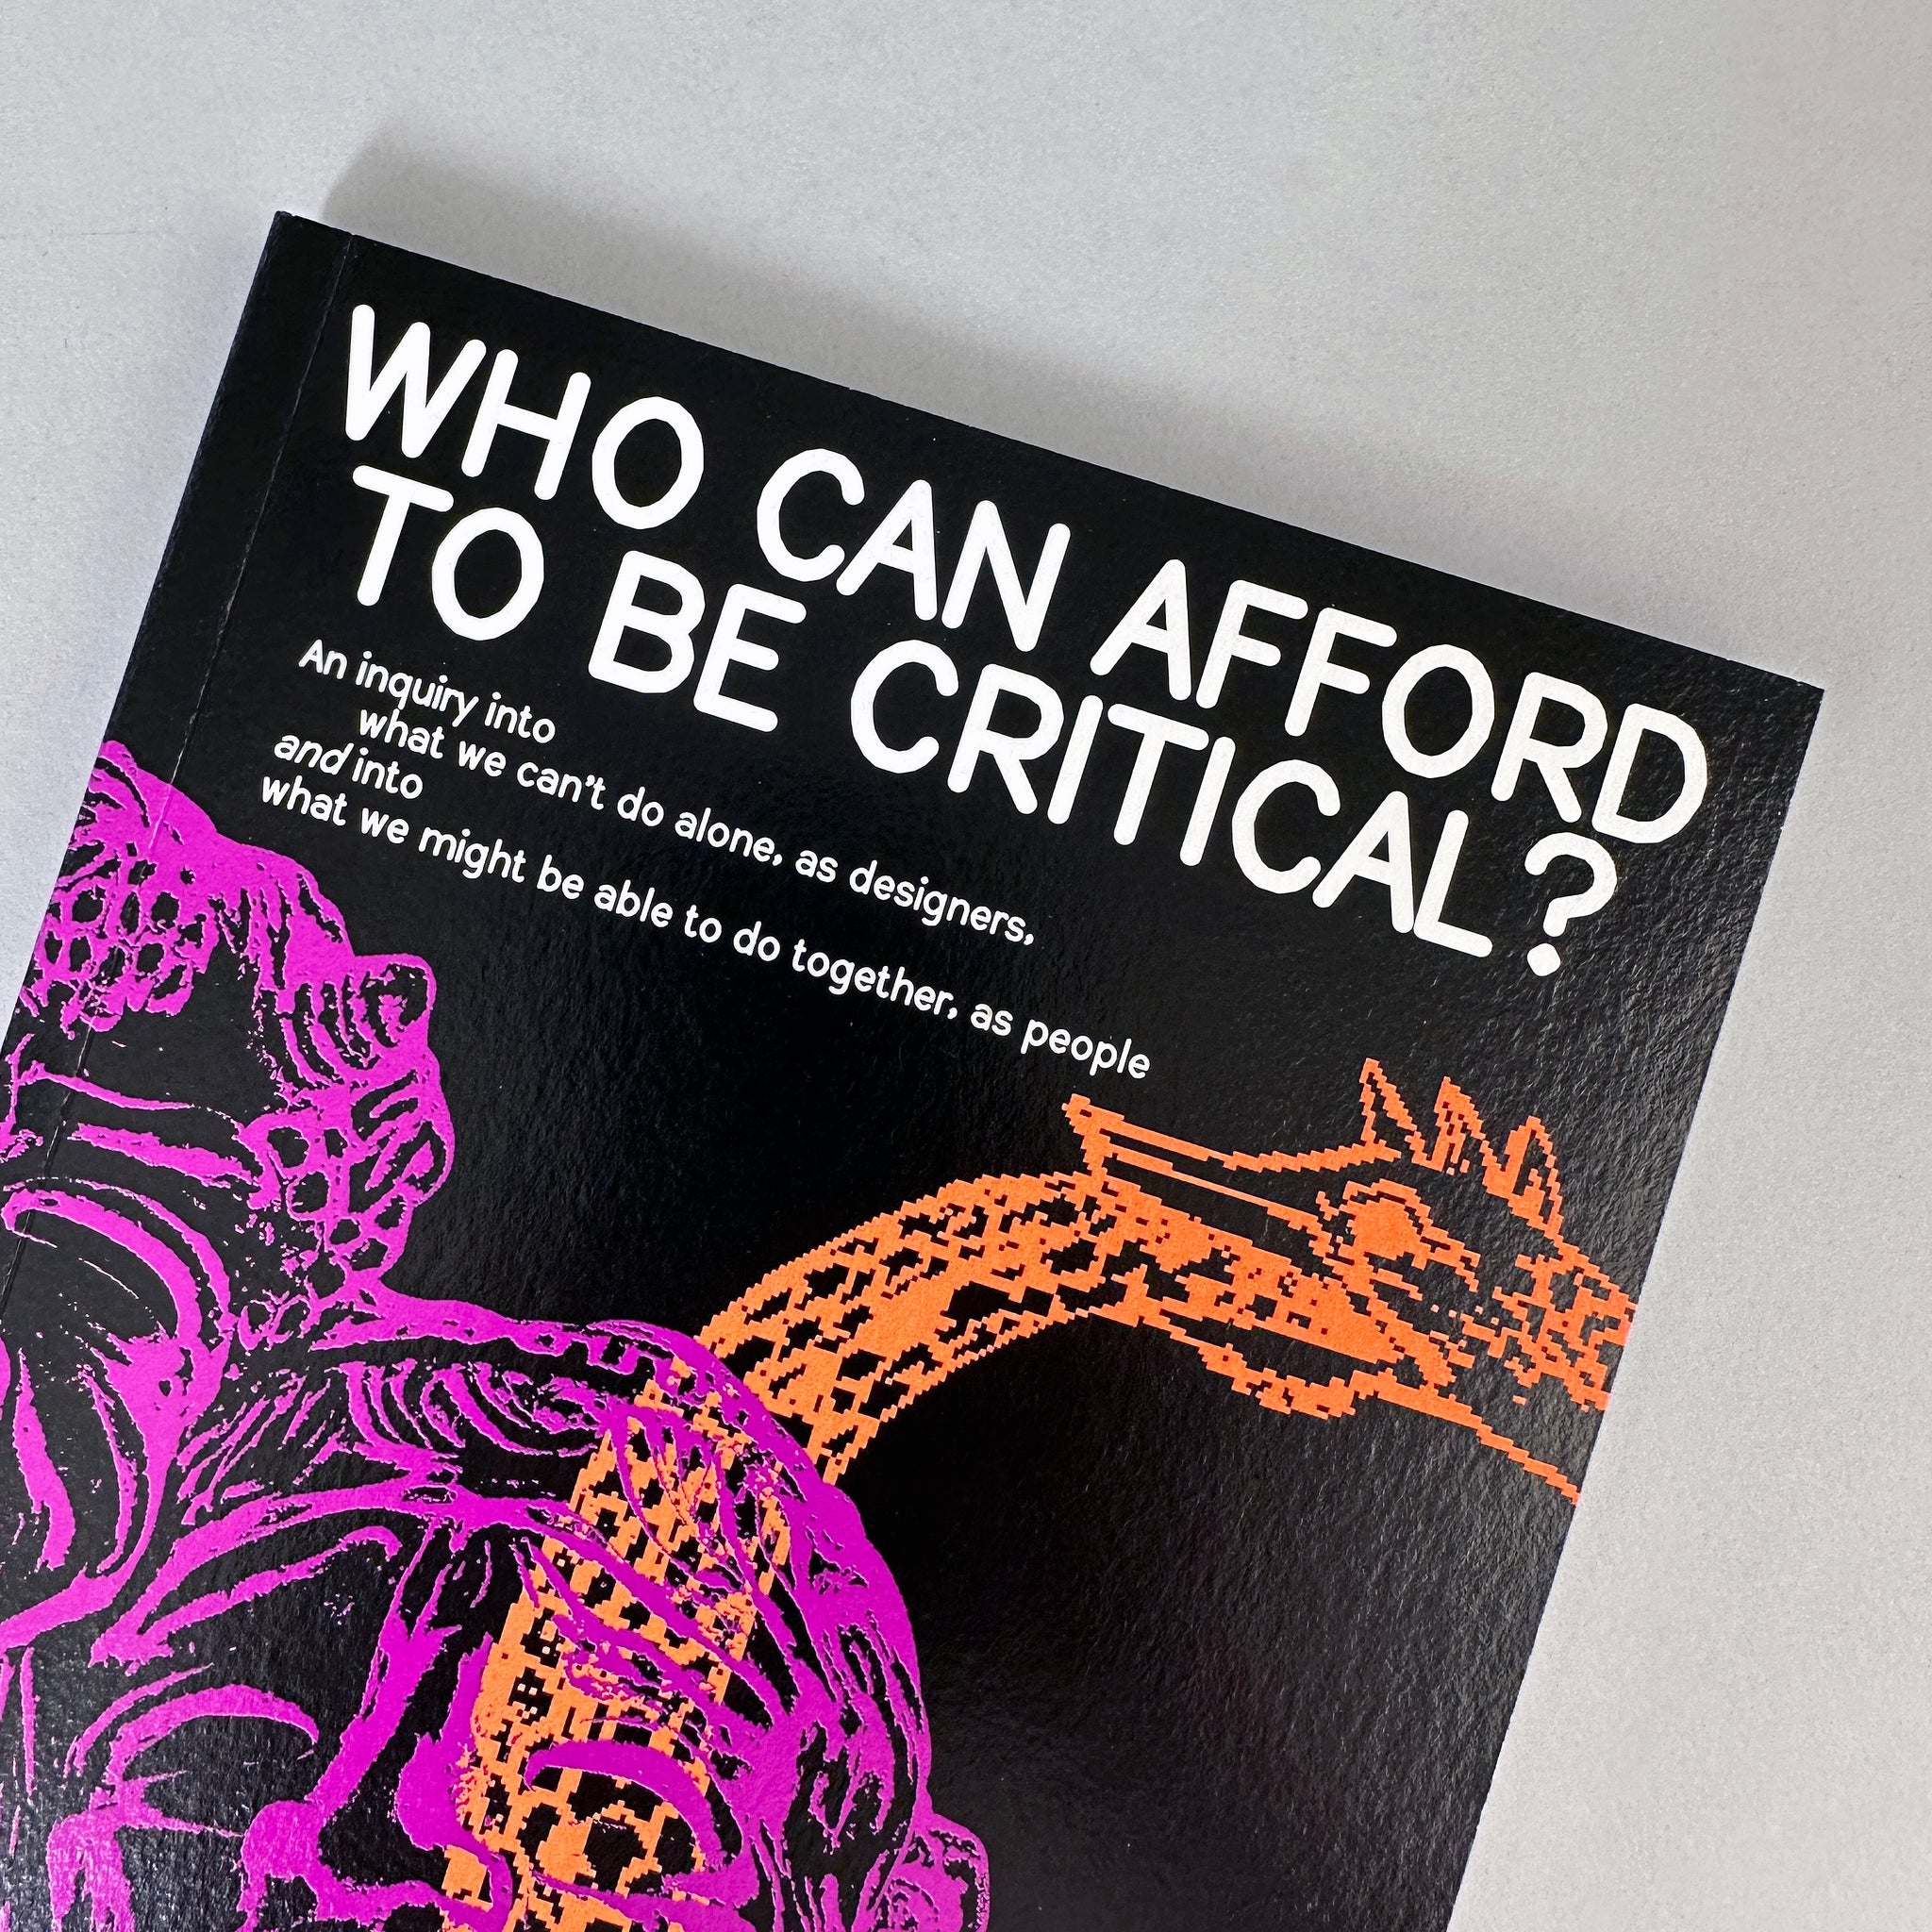 Who Can Afford to Be Critical?